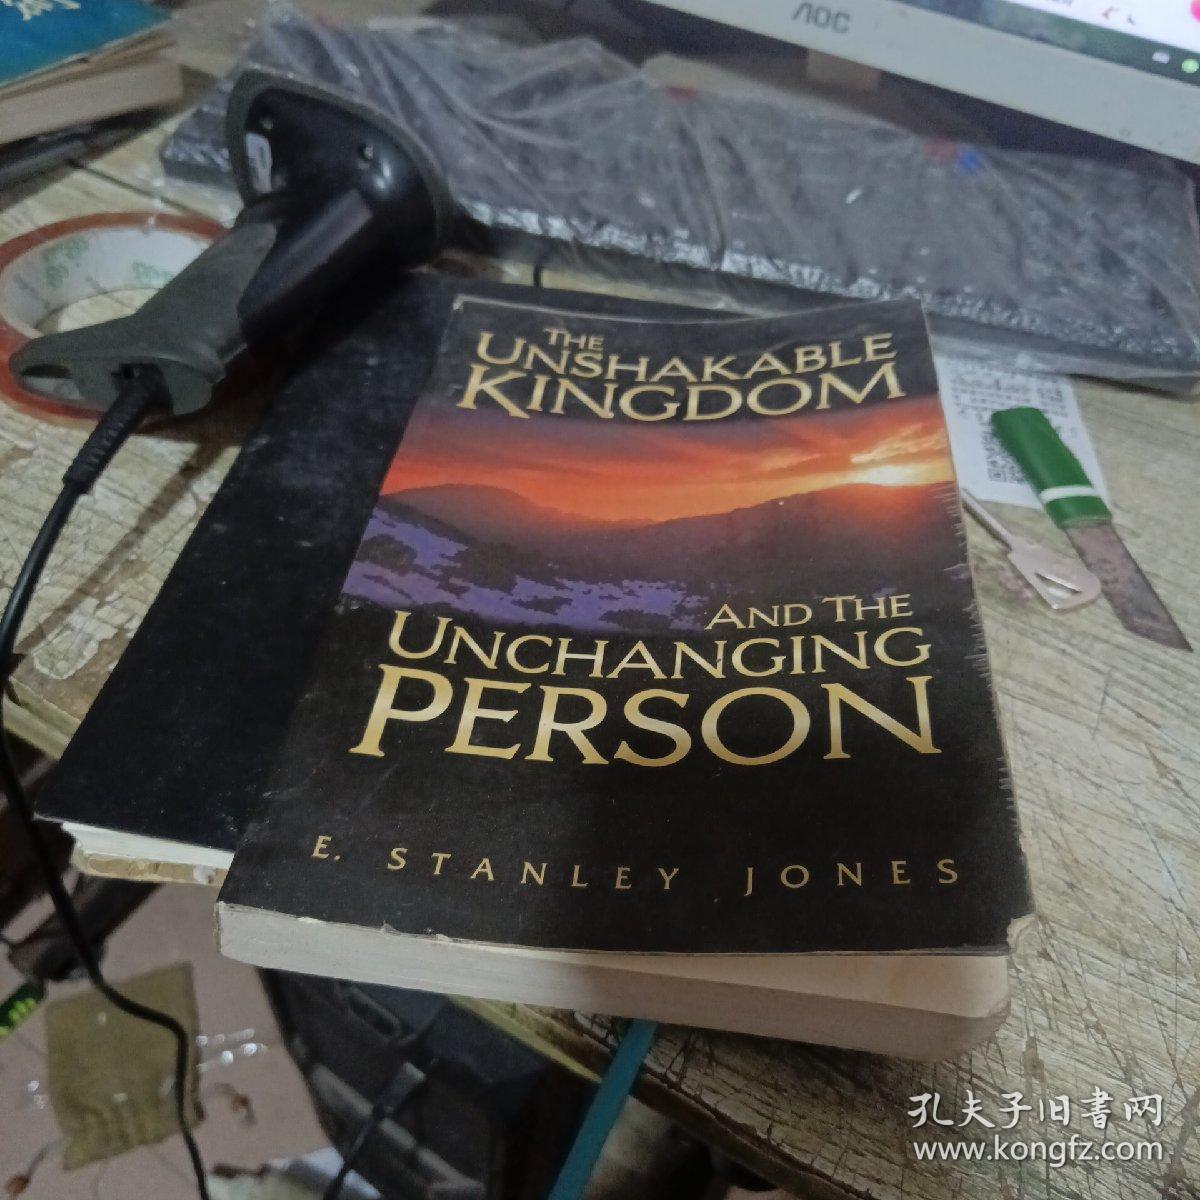 the unshakabls kingdom and the unchaning person